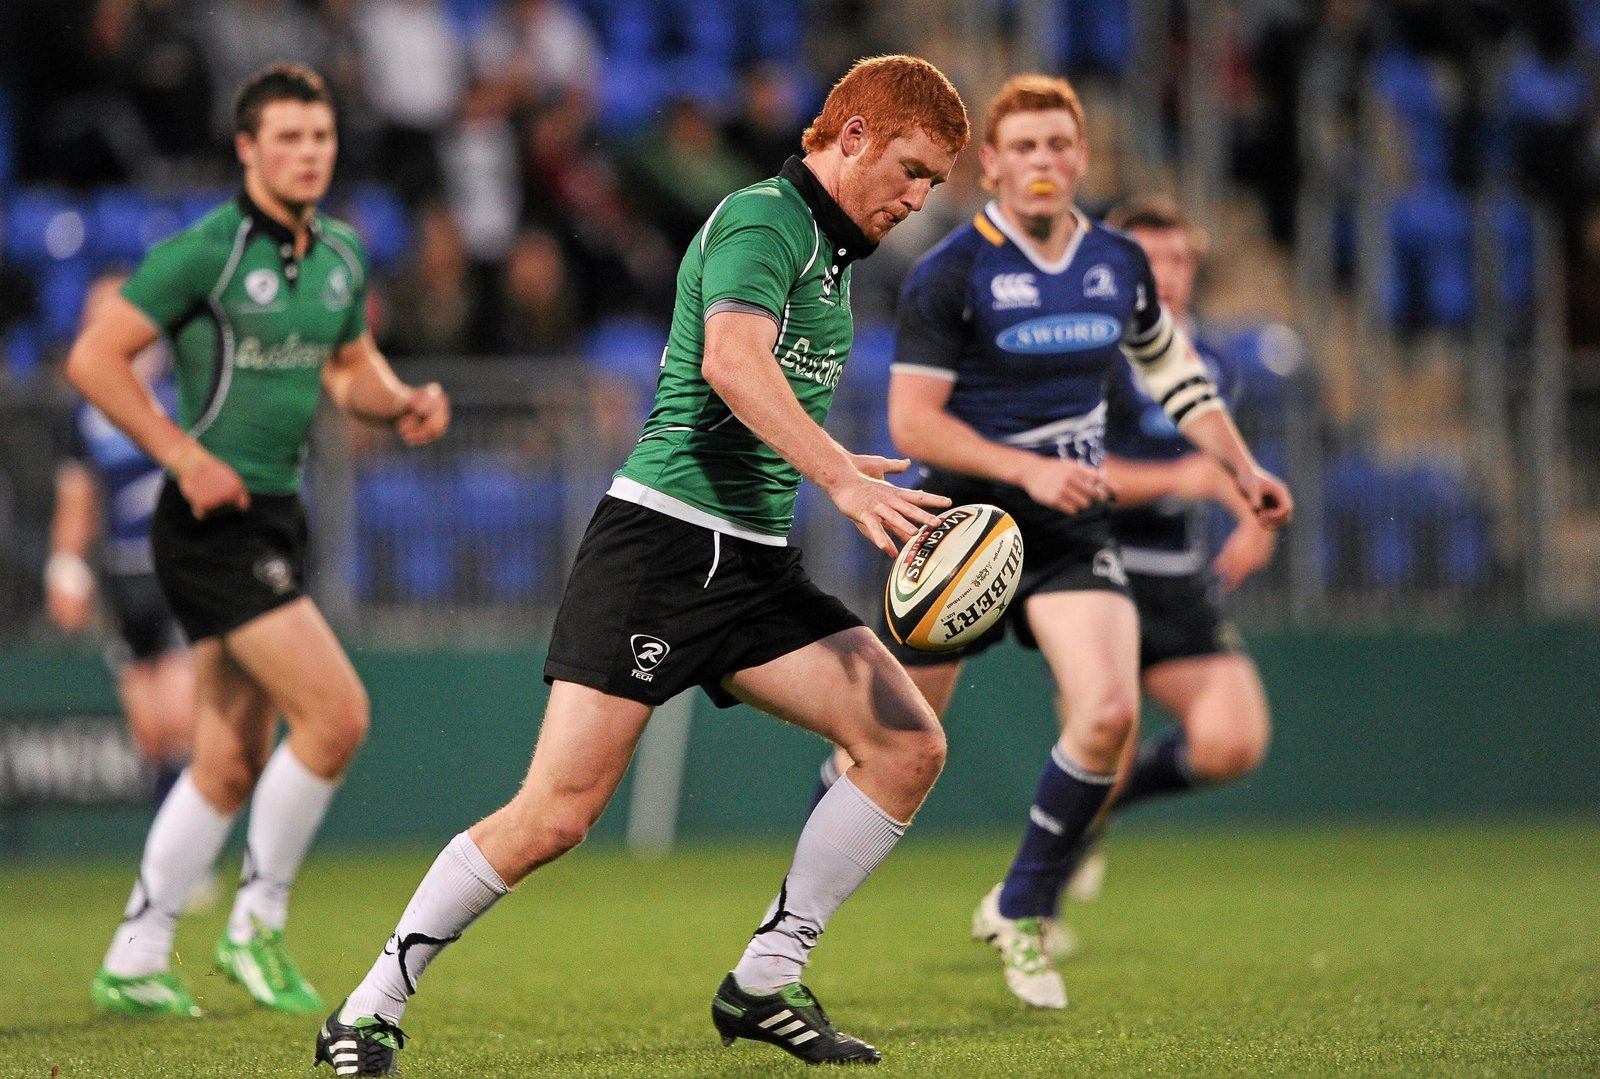 Image - Leader in action for the Connacht U20s back in his rugby-playing days in 2011